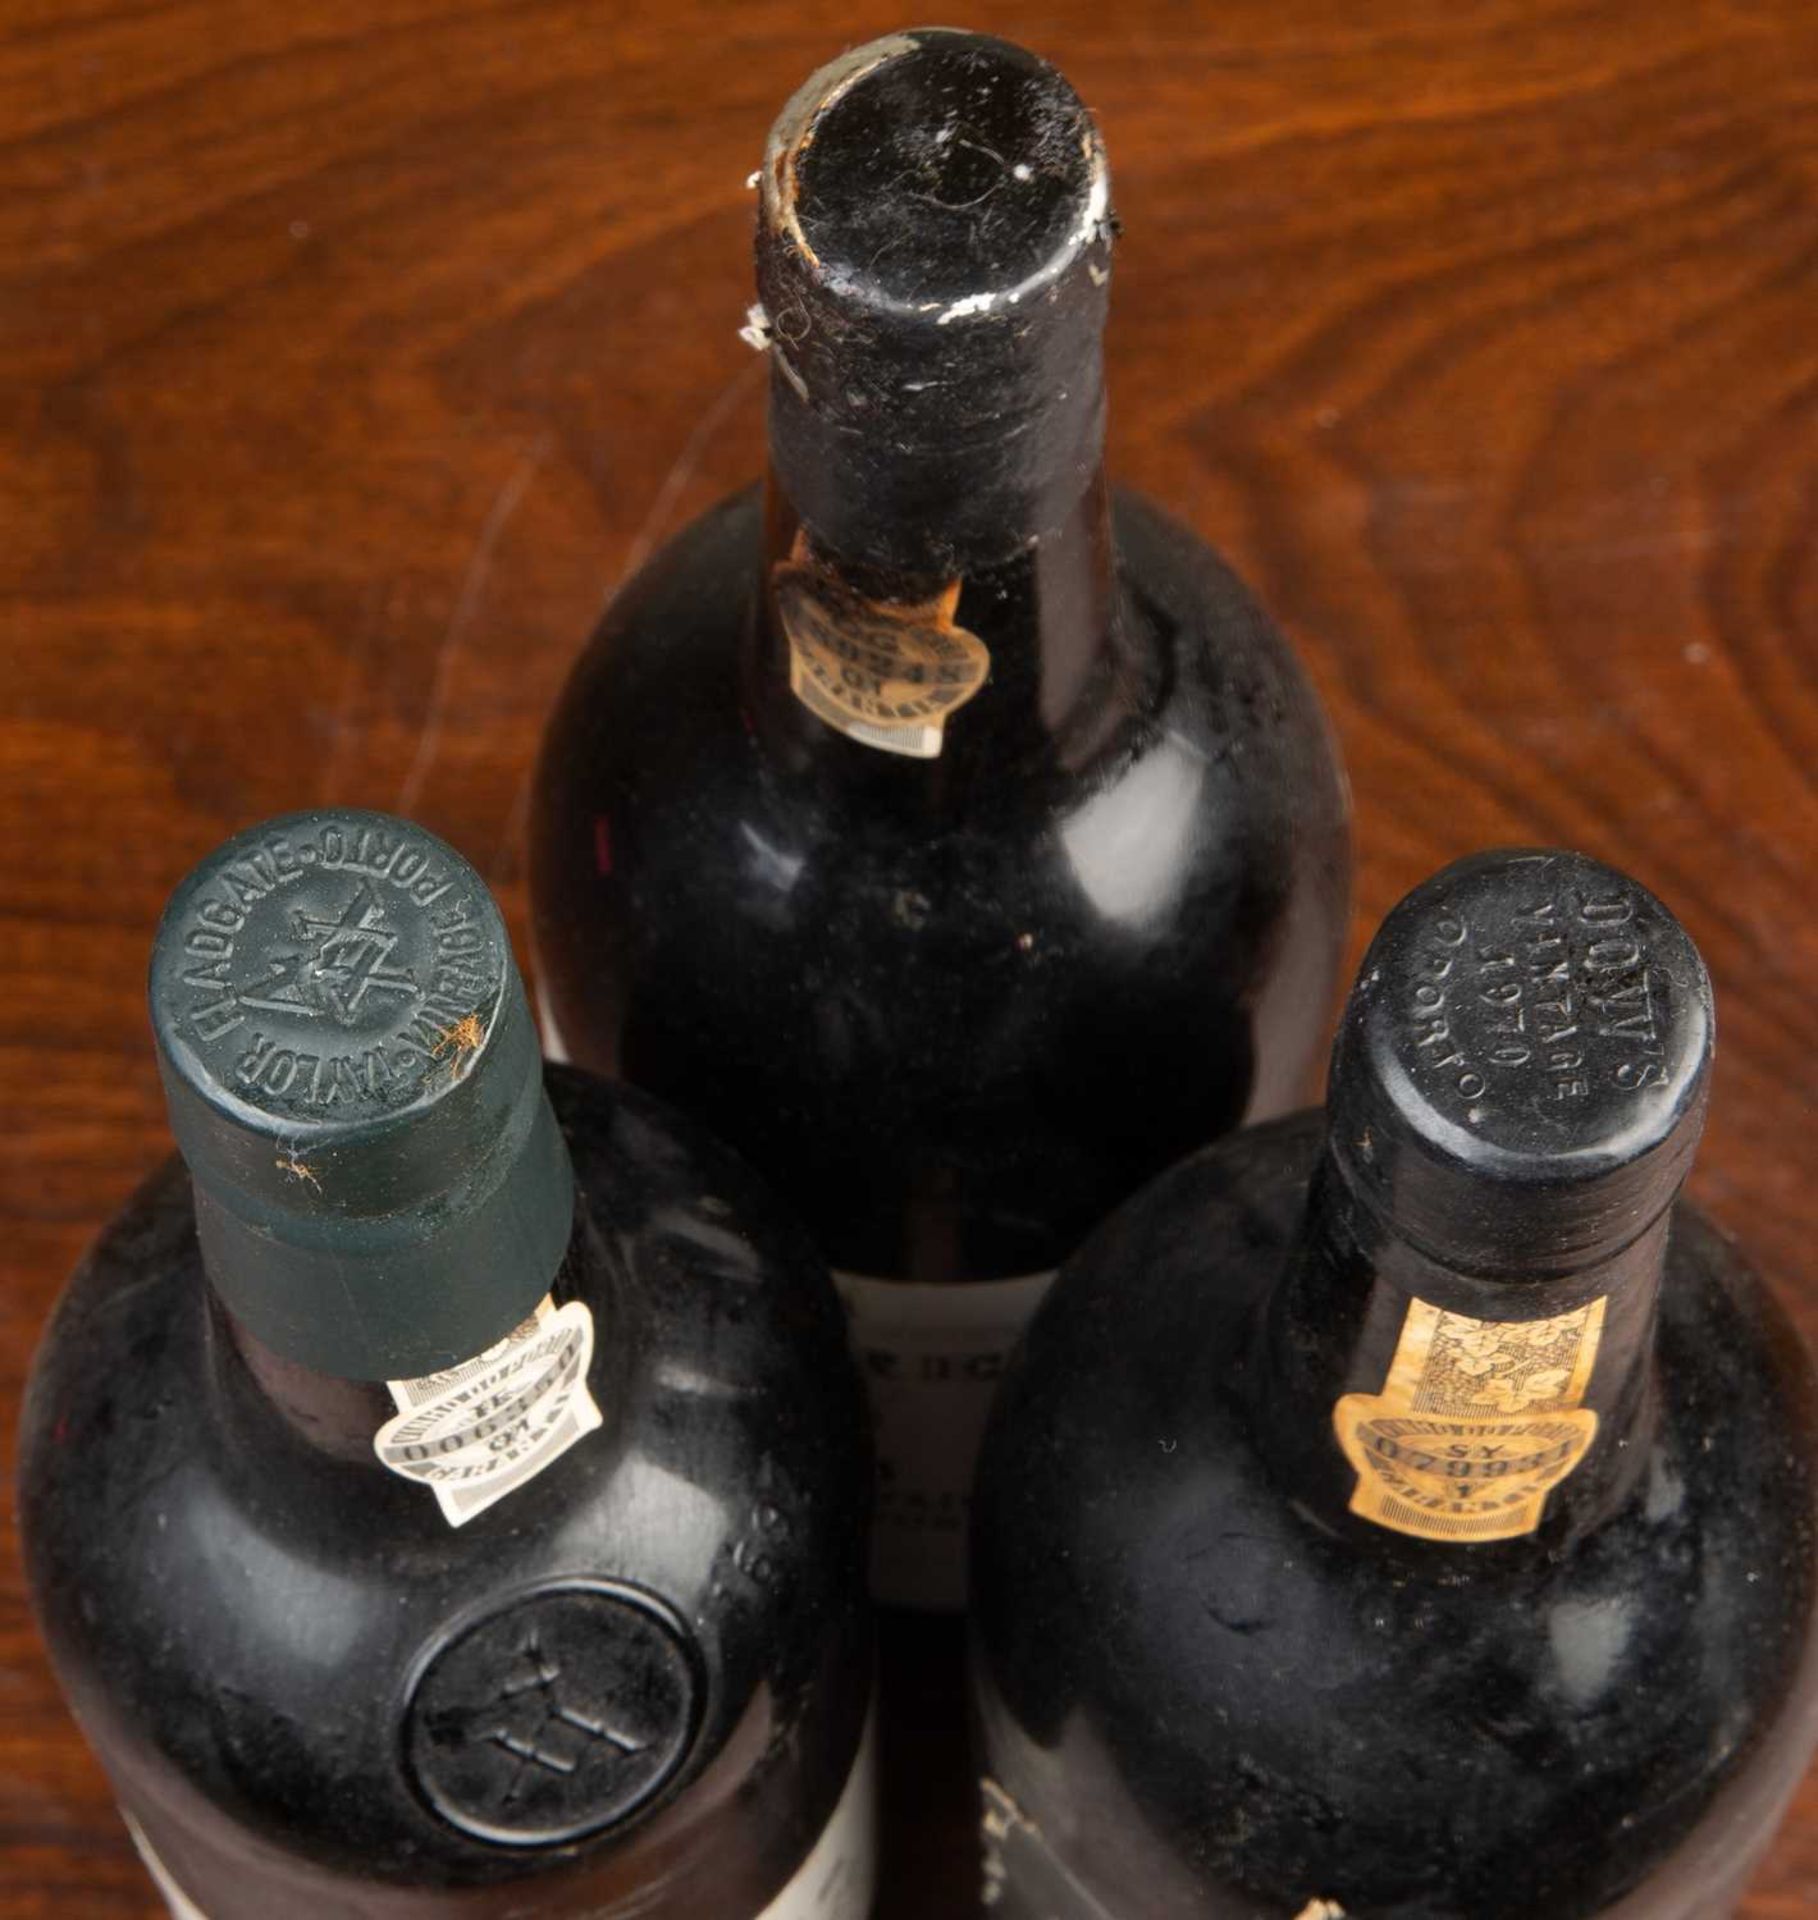 Vintage Port, a bottle of Warre's 1984, a bottle of Taylor's 1984 and a bottle of Dow's 1970 (3) - Image 2 of 2